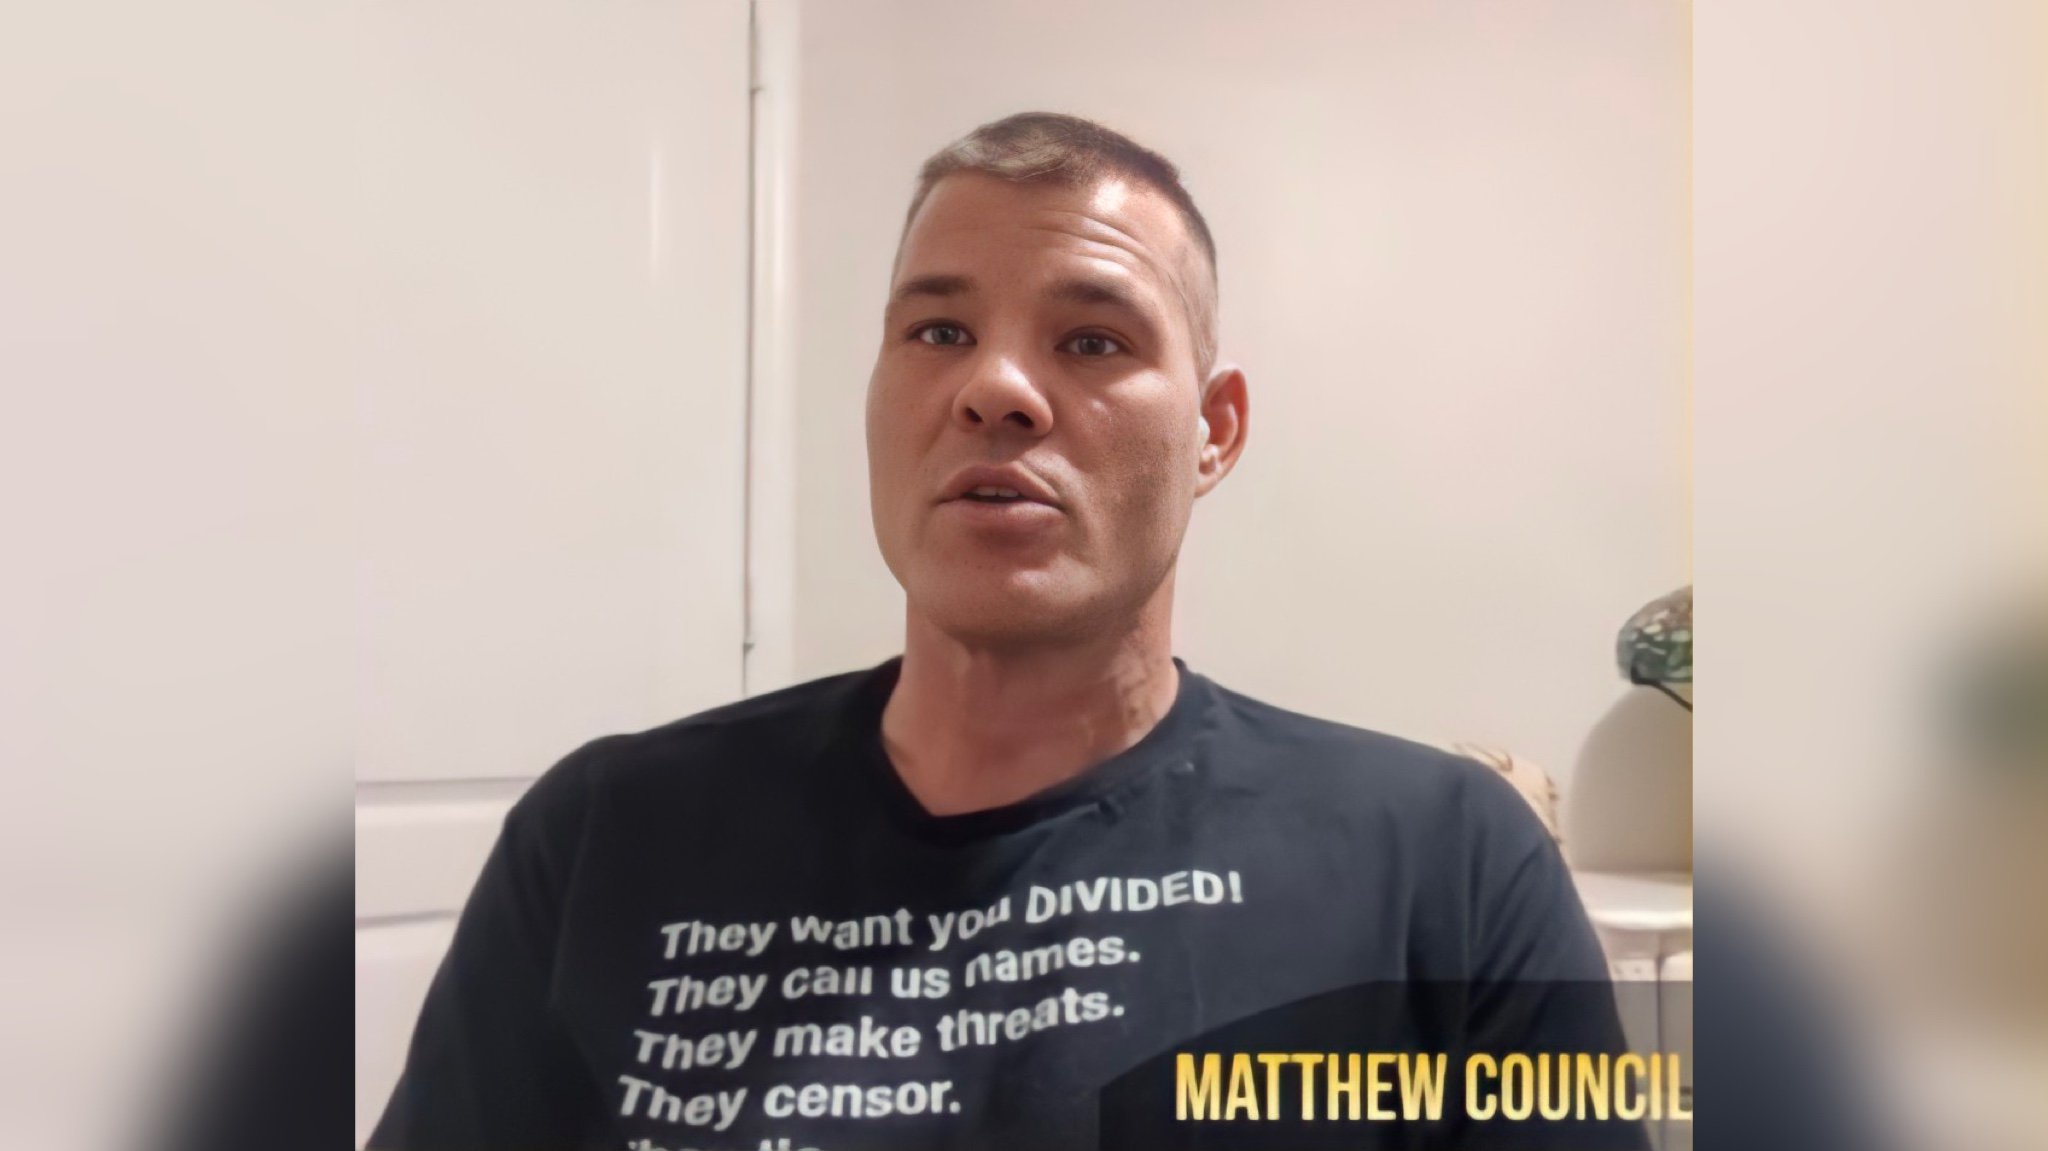 “They have Pushed Medicine on Me and Abuse Me in the Facilities and Jail Because of What I Believe” – J6 Defendant Matt Council Shares his Tragic Story